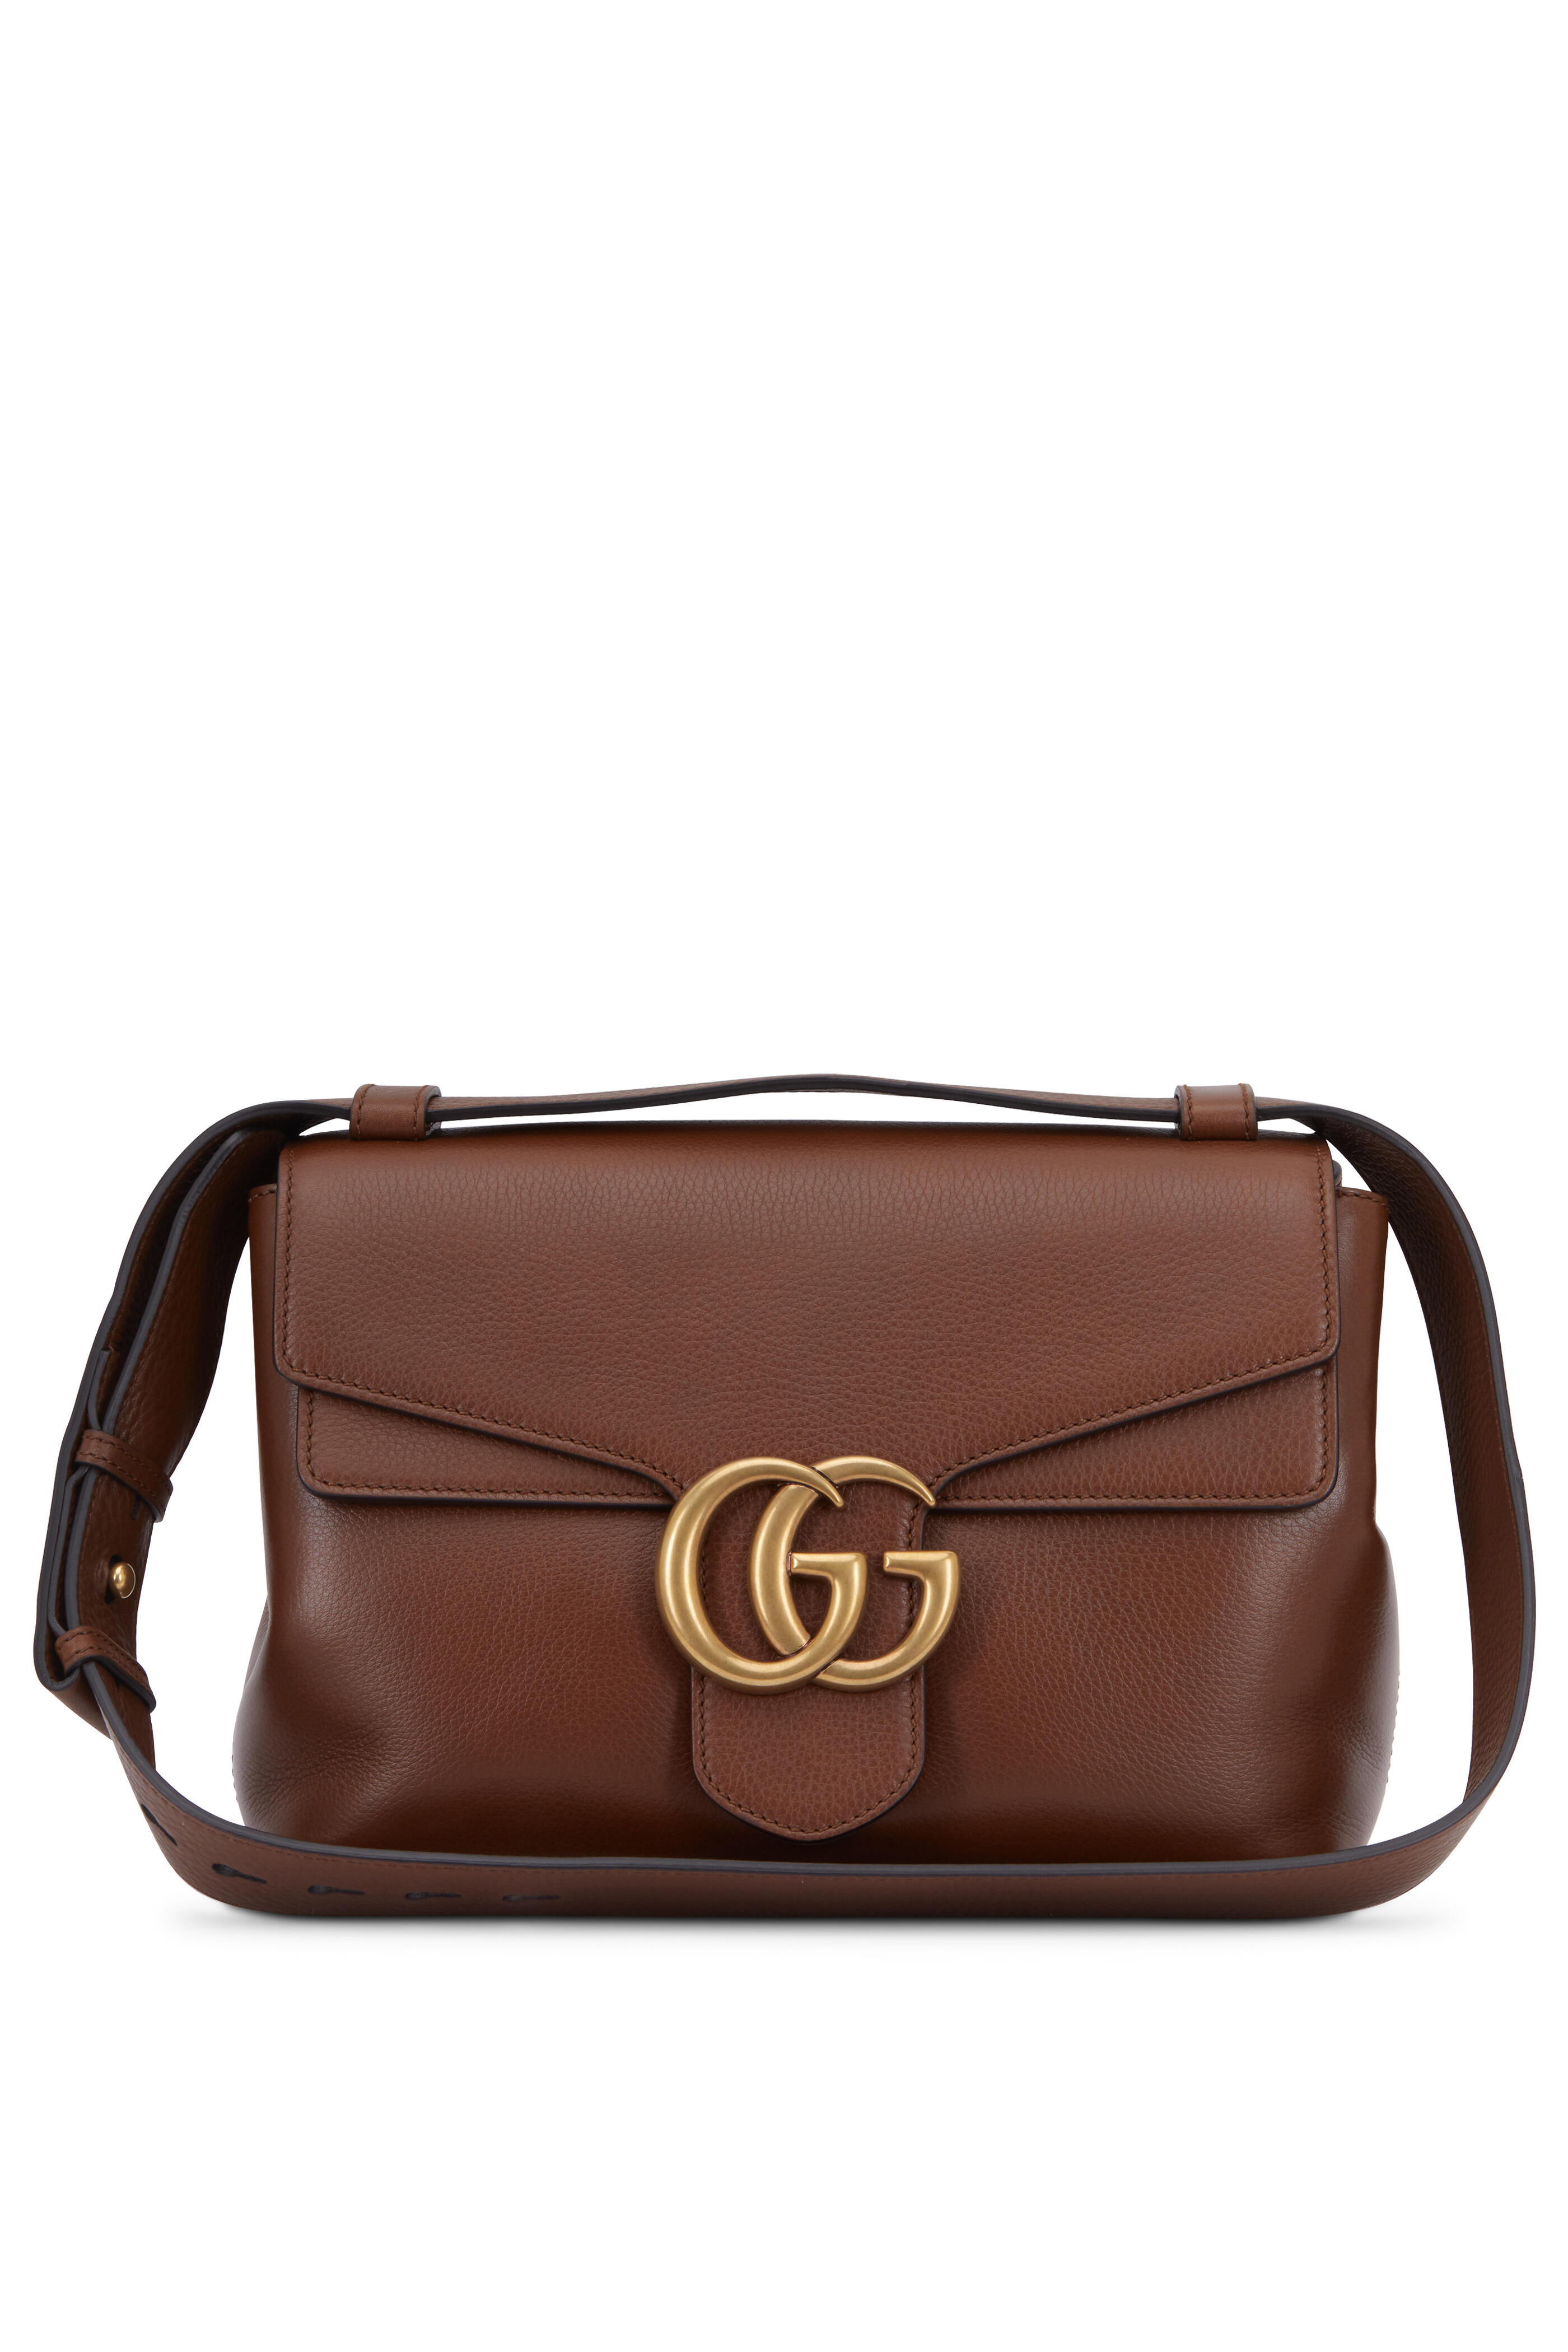 Gucci - GG Marmont Nutmeg Leather Flap Small Shoulder Bag